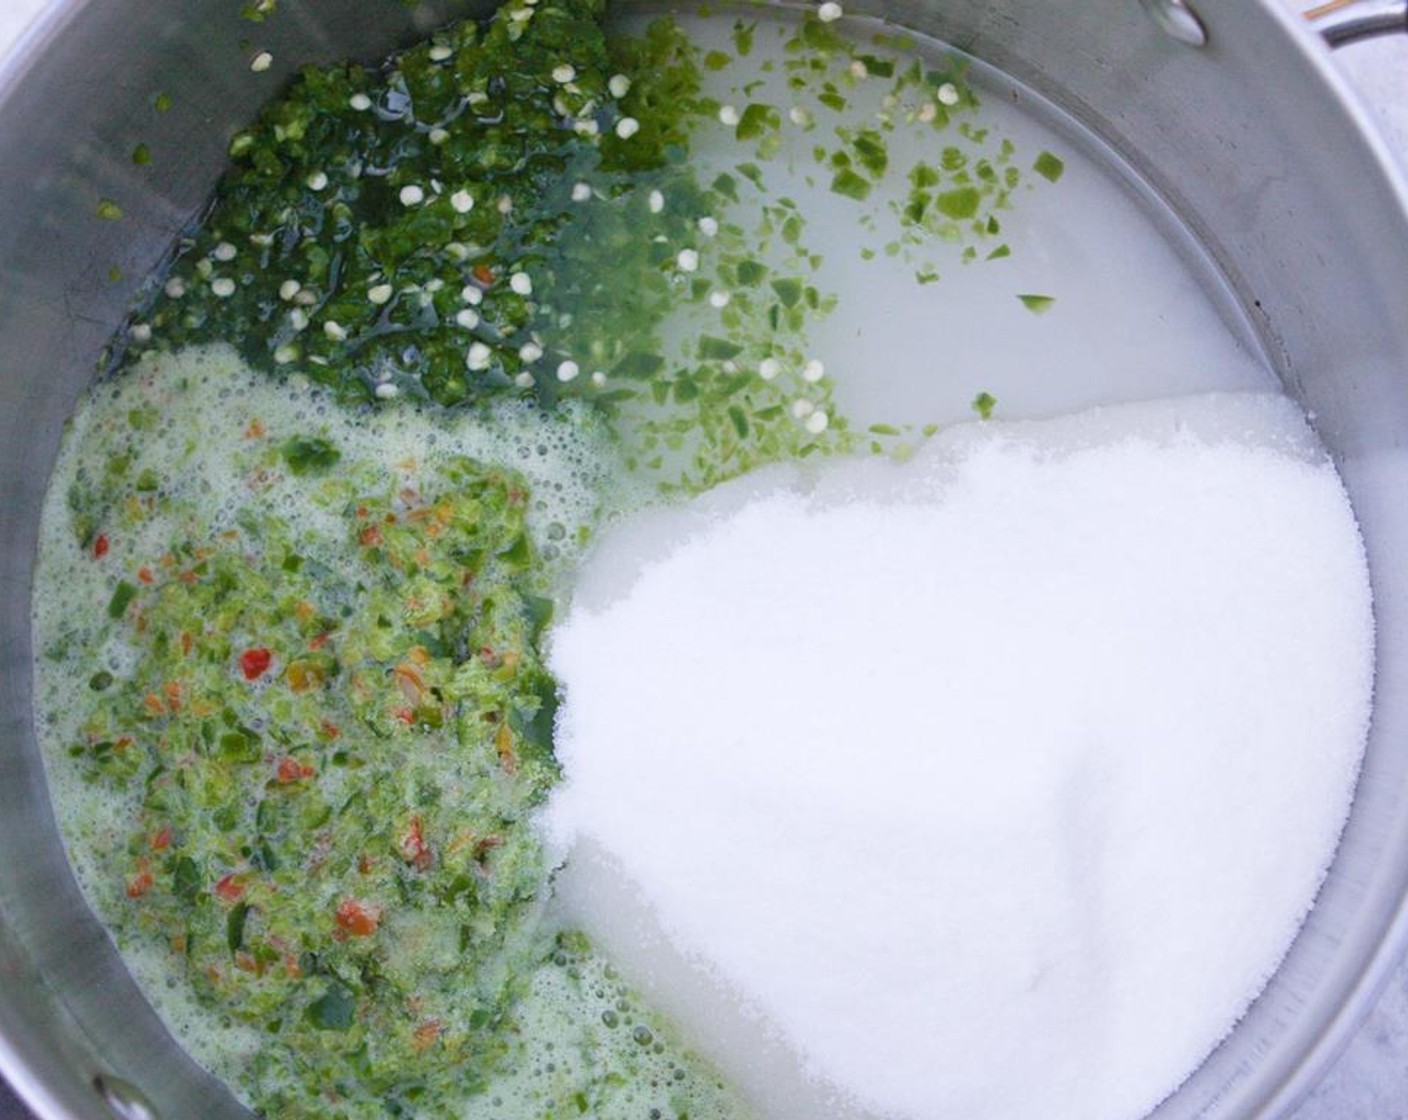 step 2 In a large saucepan, combine the green bell pepper, jalapeno pepper, Granulated Sugar (6 cups), Distilled White Vinegar (1 1/2 cups), Salt (1/2 tsp). Bring to a simmer and cook for 10 minutes, stirring occasionally.